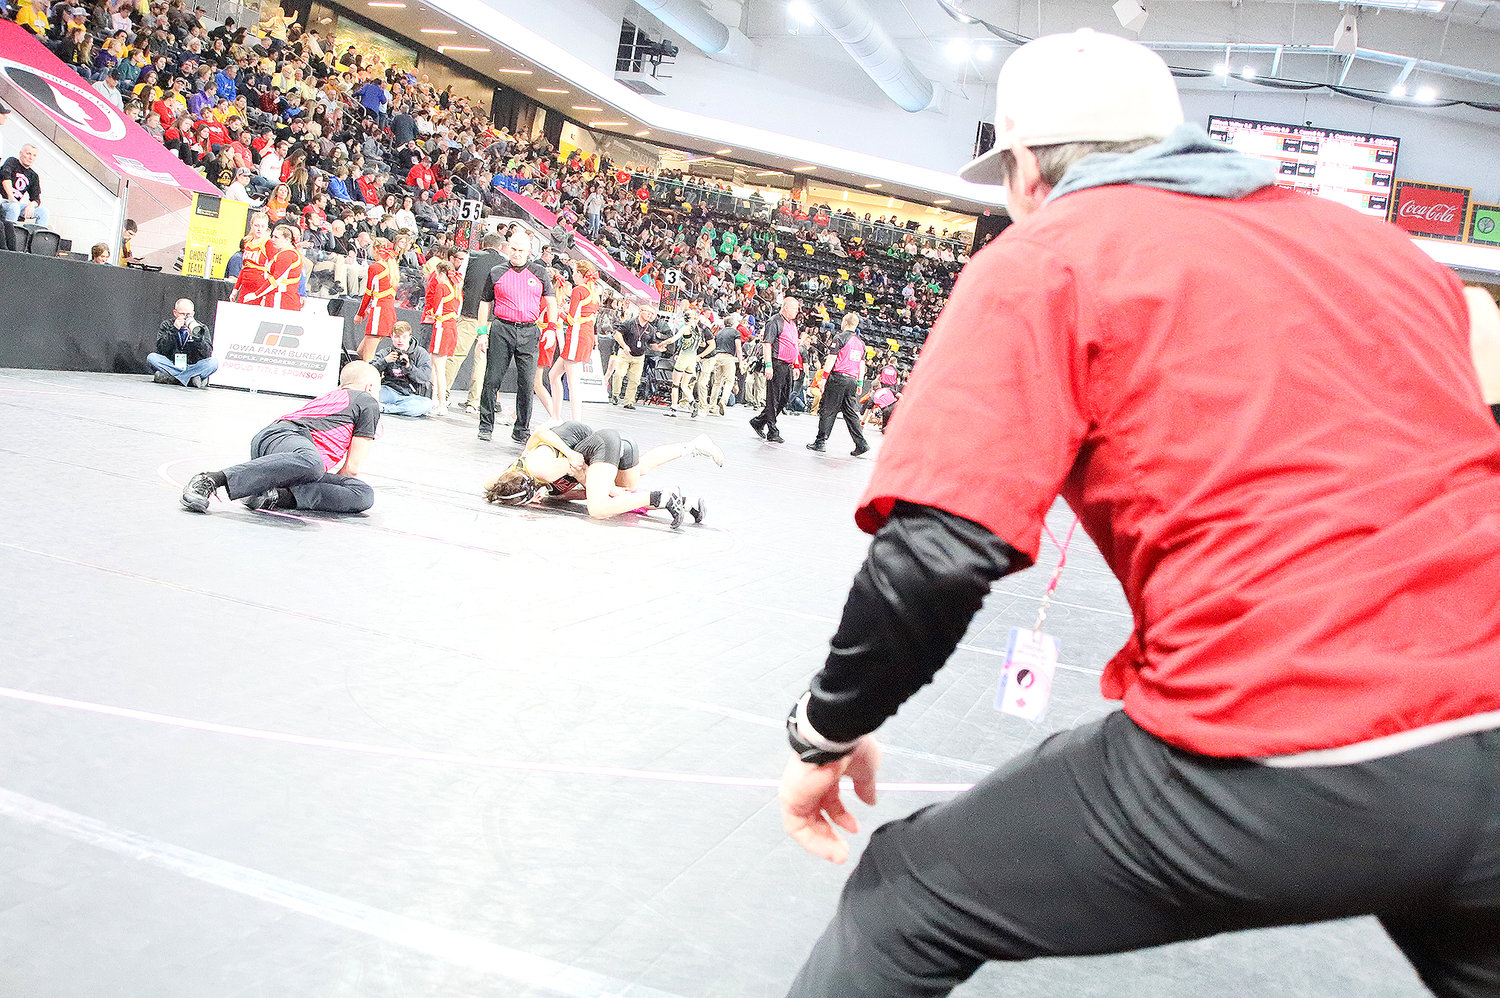 Fort Madison head coach Kyle Doherty reacts to a momentum shift in Hailey Kemper's first match of the day Thursday at the Xtreme Arena in Coralville.